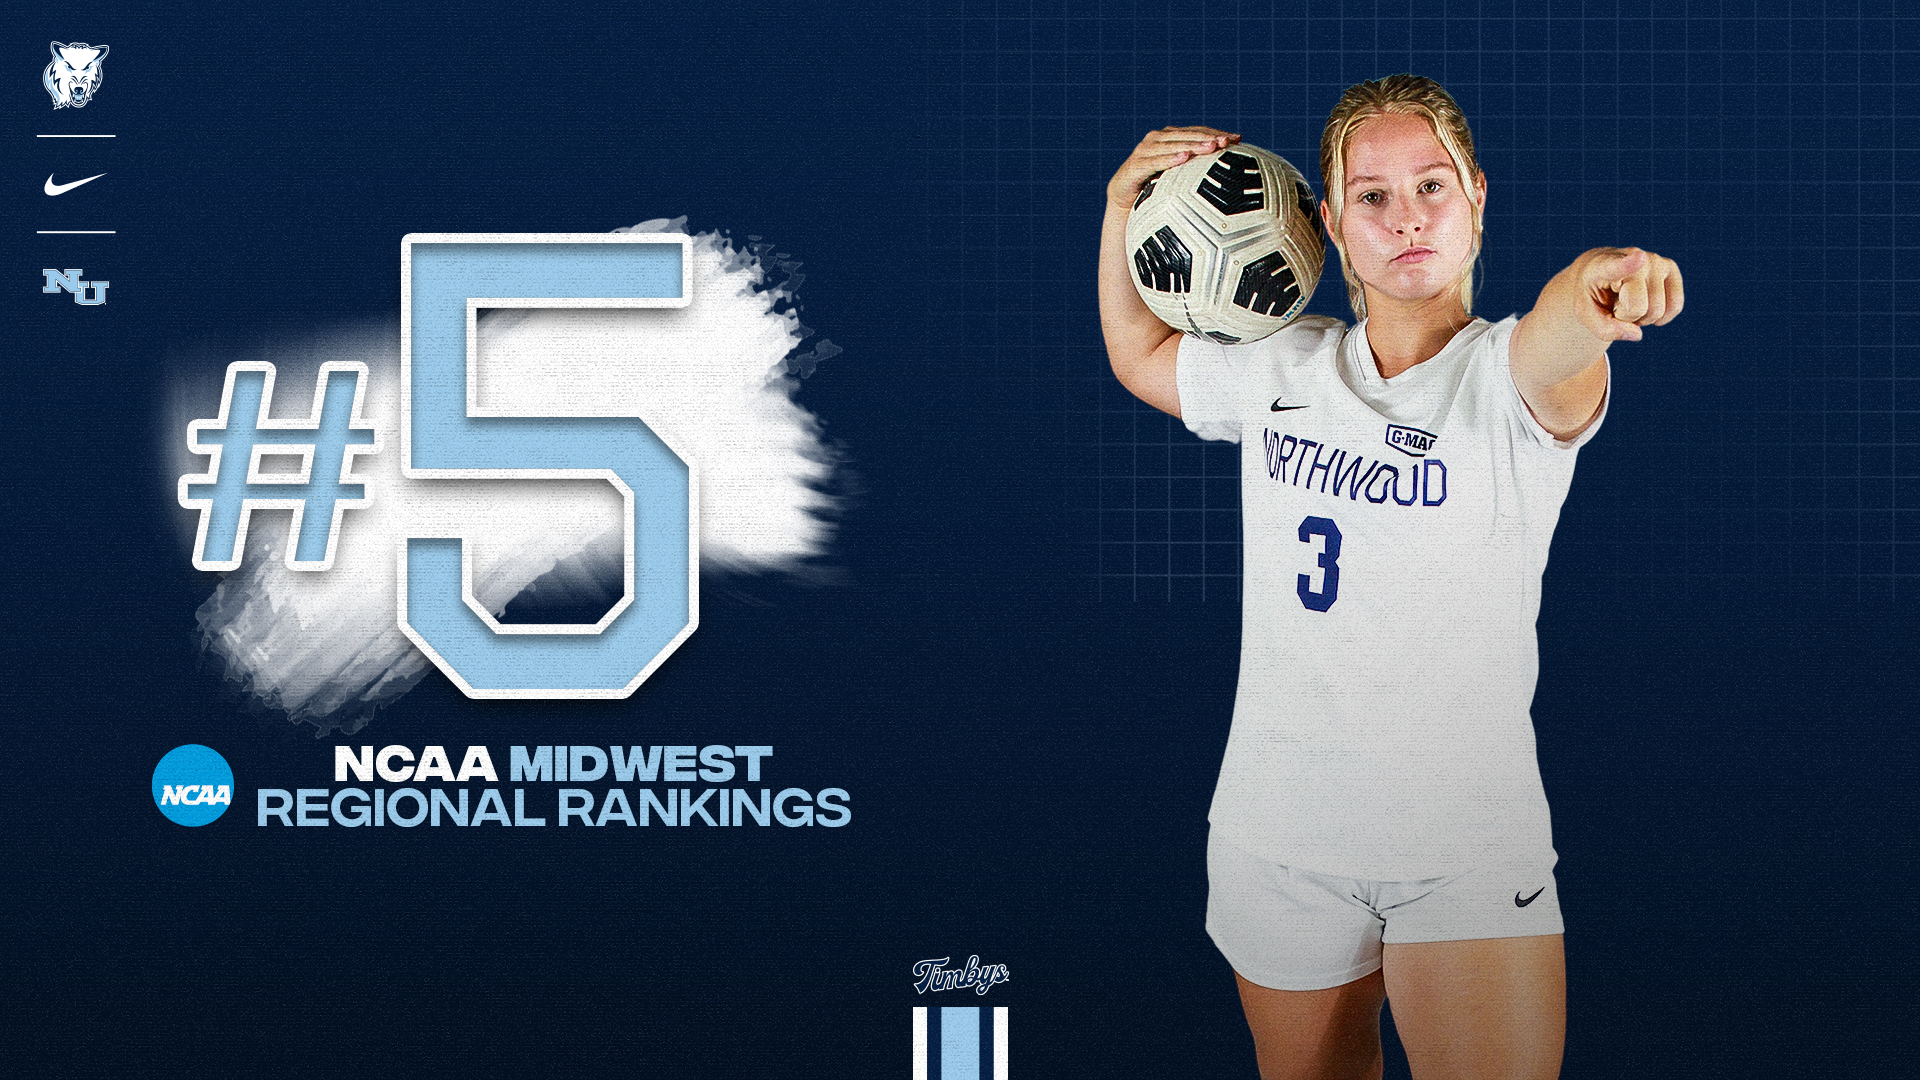 Women's Soccer Debuts At No. 5 In Initial NCAA Midwest Regional Rankings